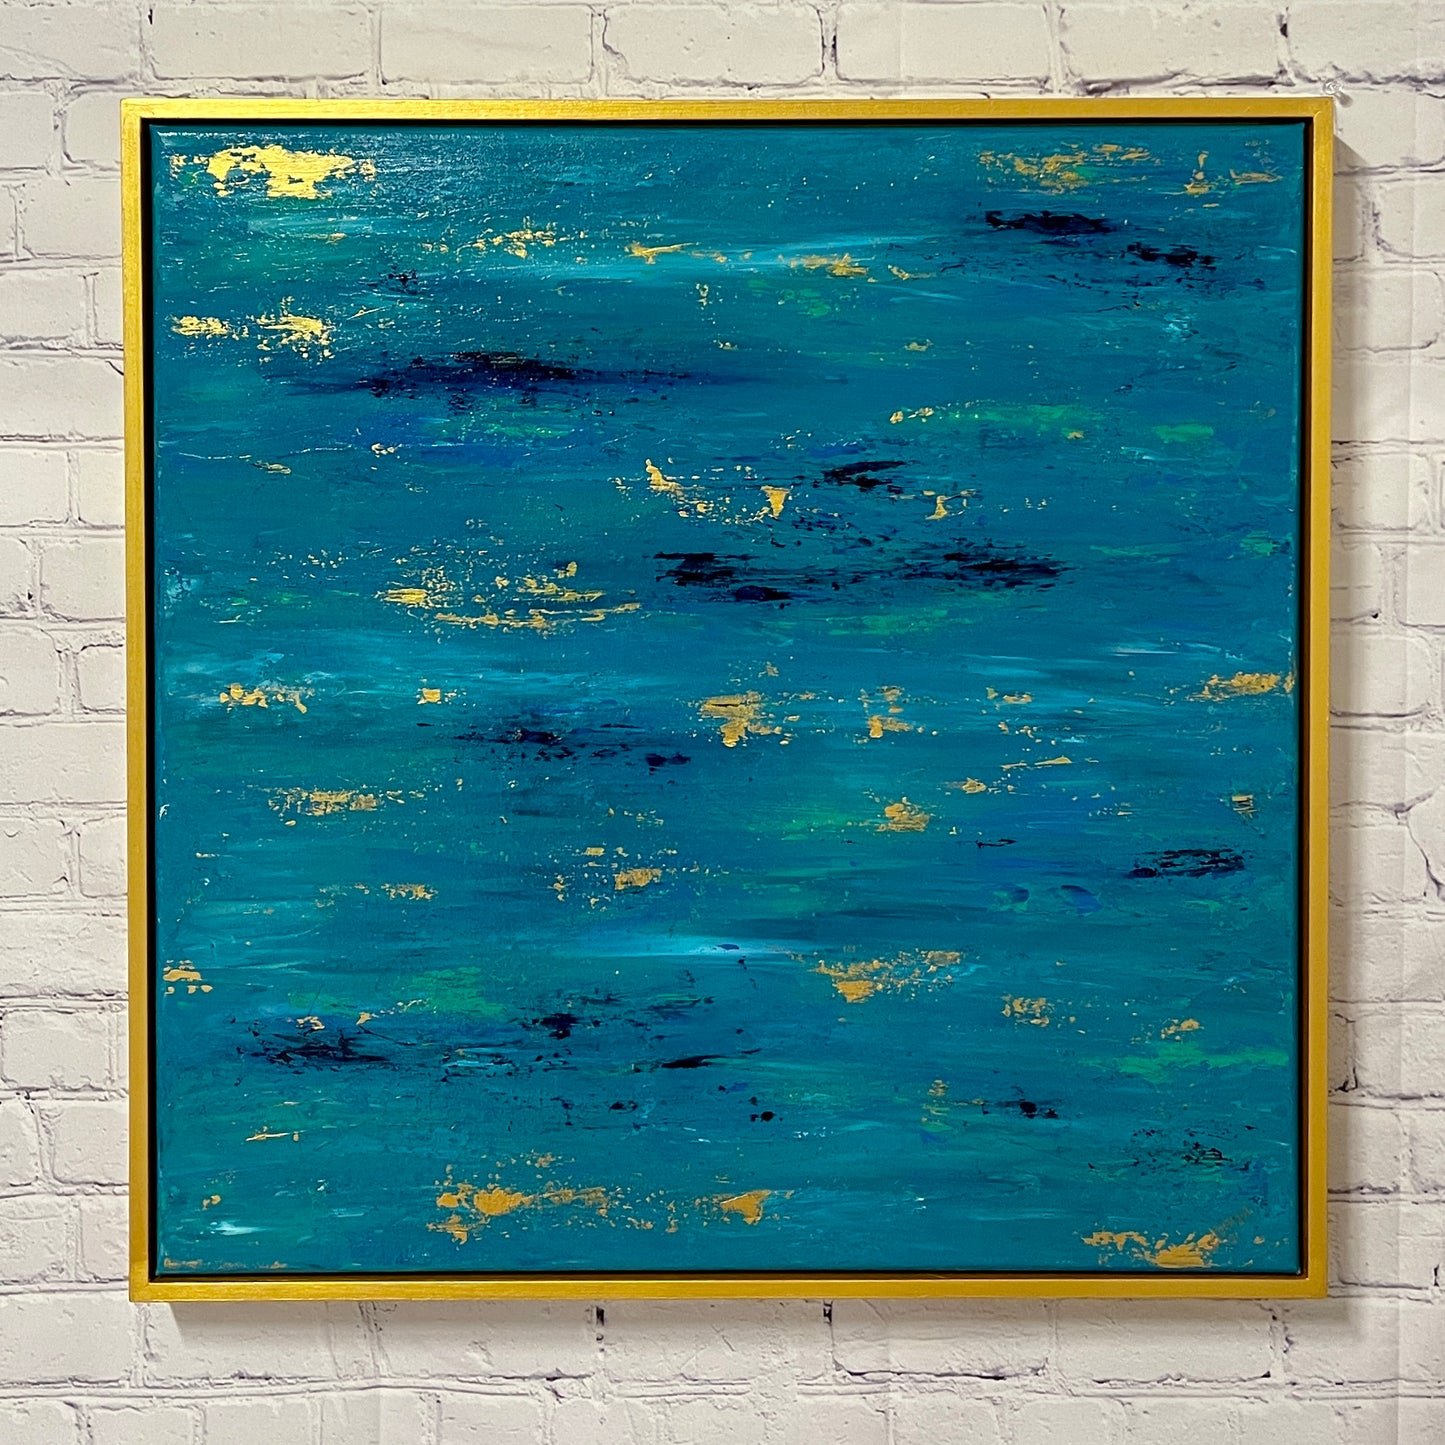 Let's Just Fall | 24"x24" Framed Original Abstract